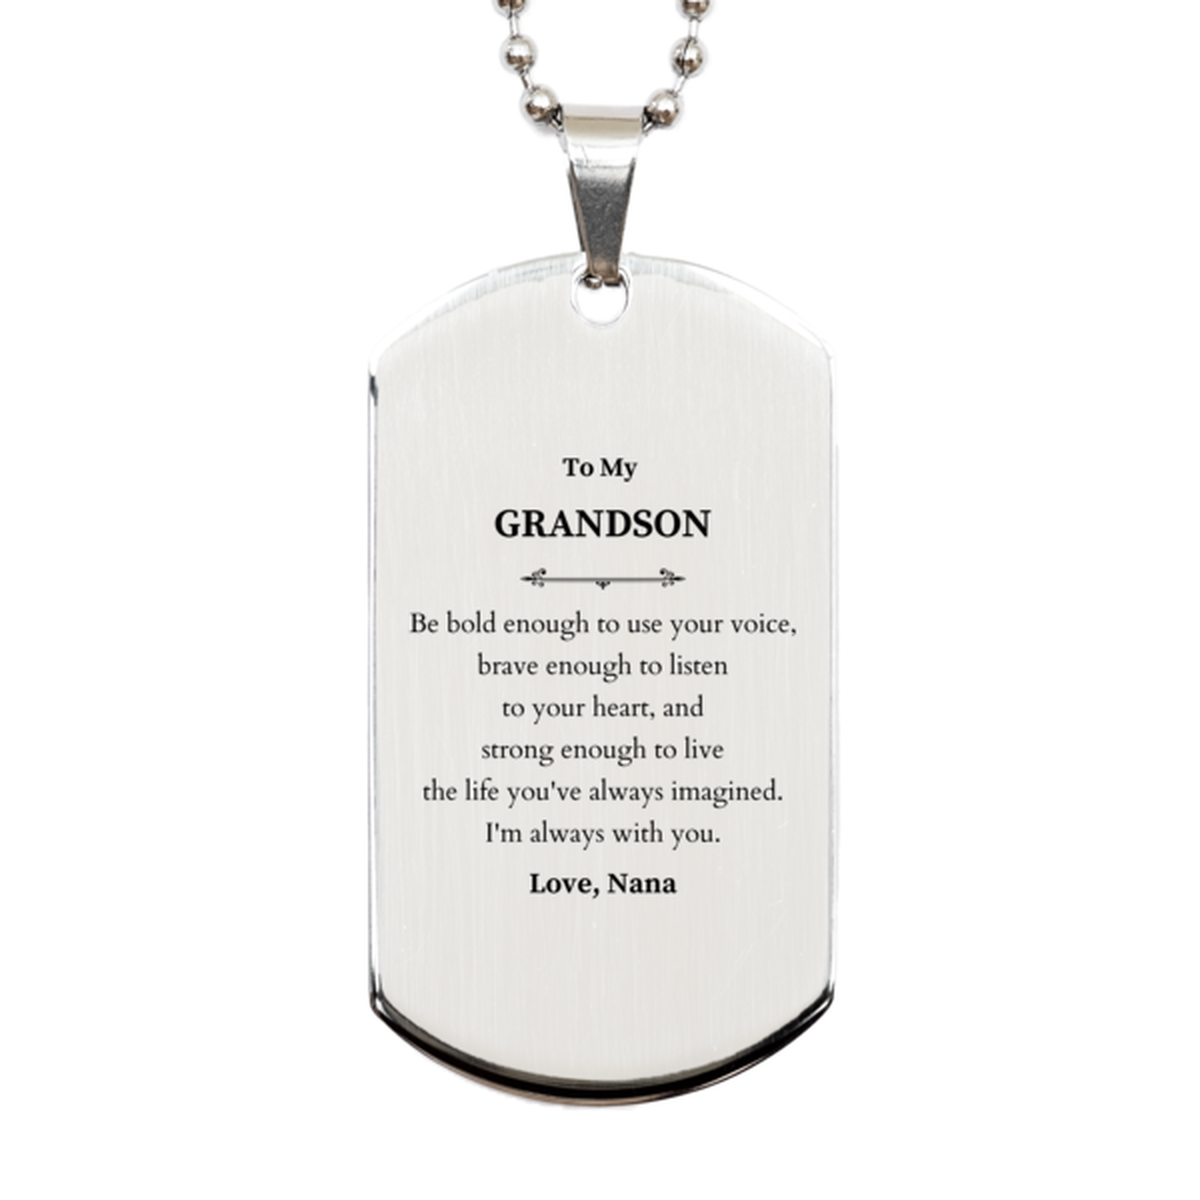 Keepsake Grandson Silver Dog Tag Gift Idea Graduation Christmas Birthday Grandson from Nana, Grandson Be bold enough to use your voice, brave enough to listen to your heart. Love, Nana